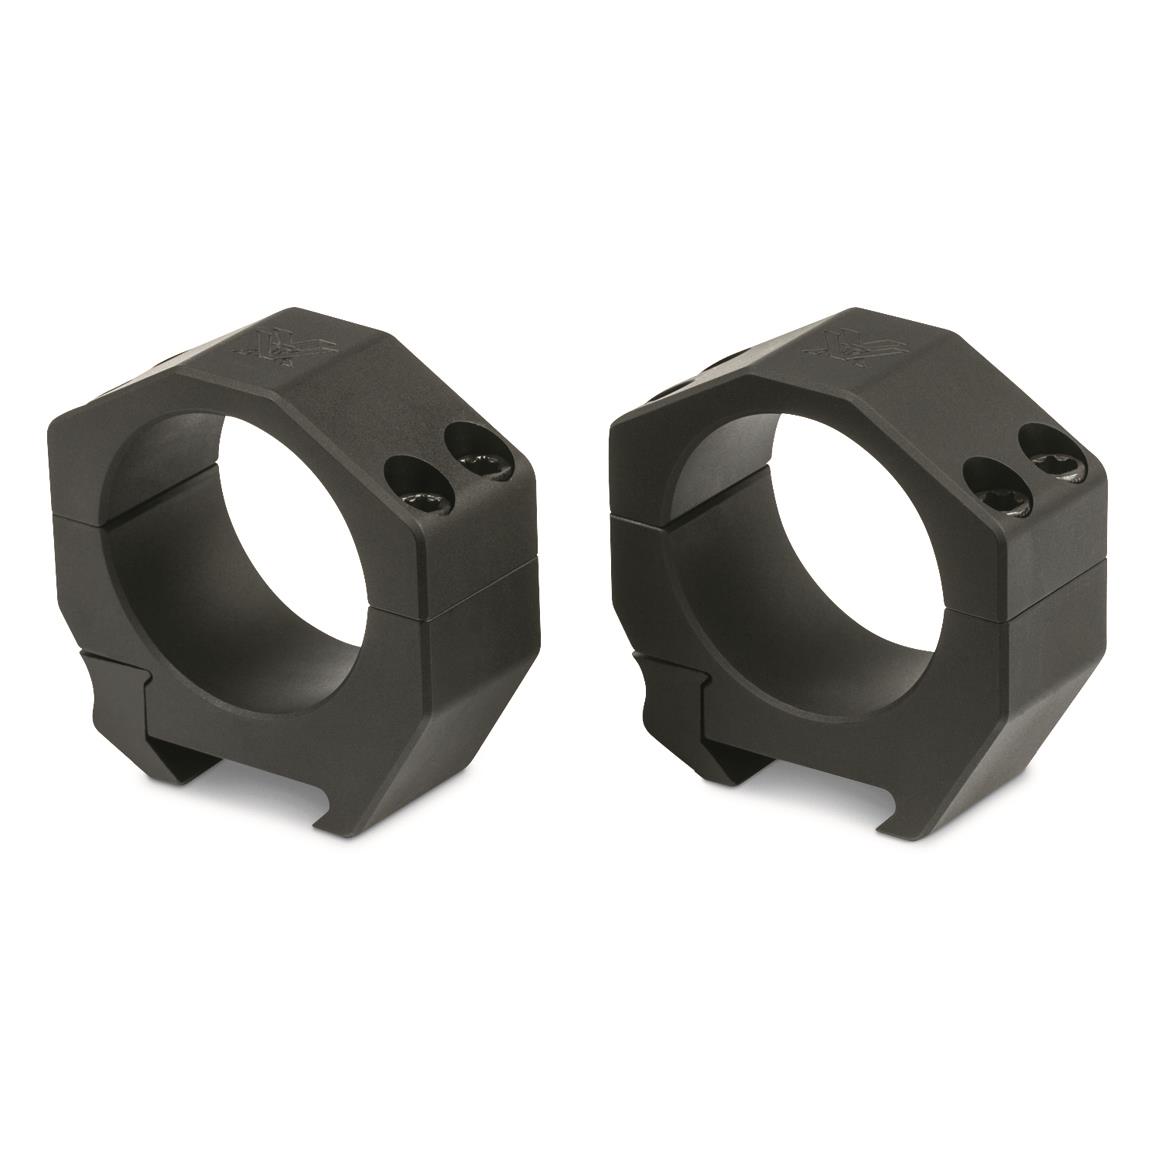 Vortex Precision Matched 34mm Scope Rings, 0.92" Height